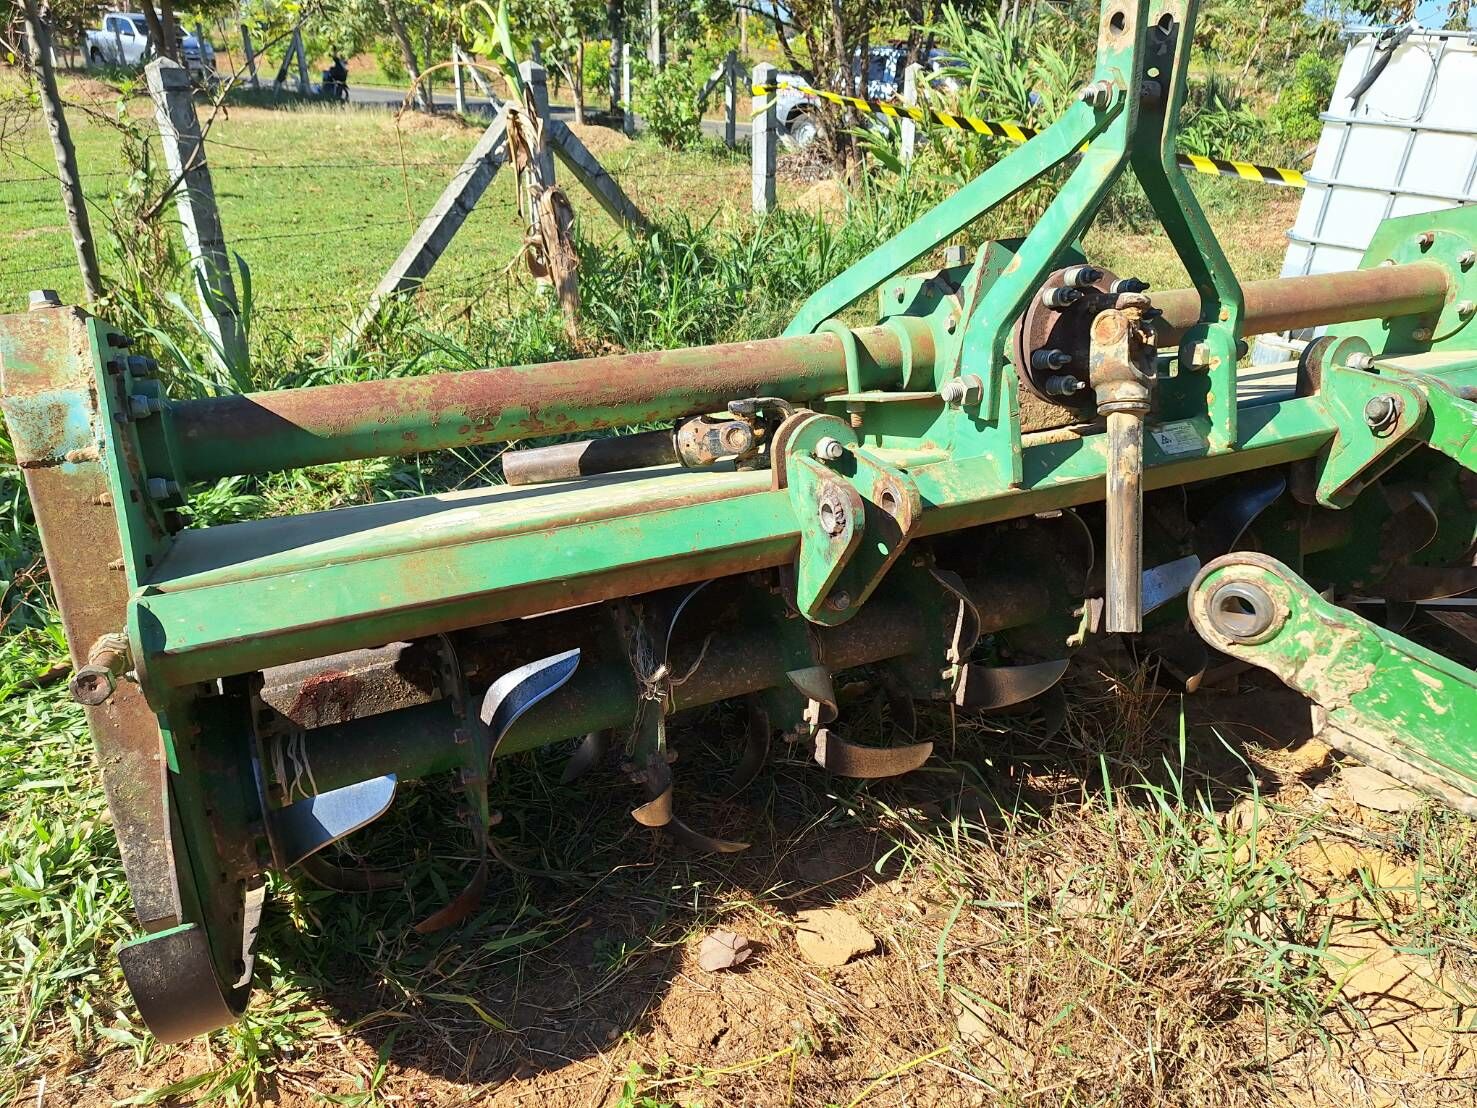 Thai man loses his life when using YouTube to repair tractor